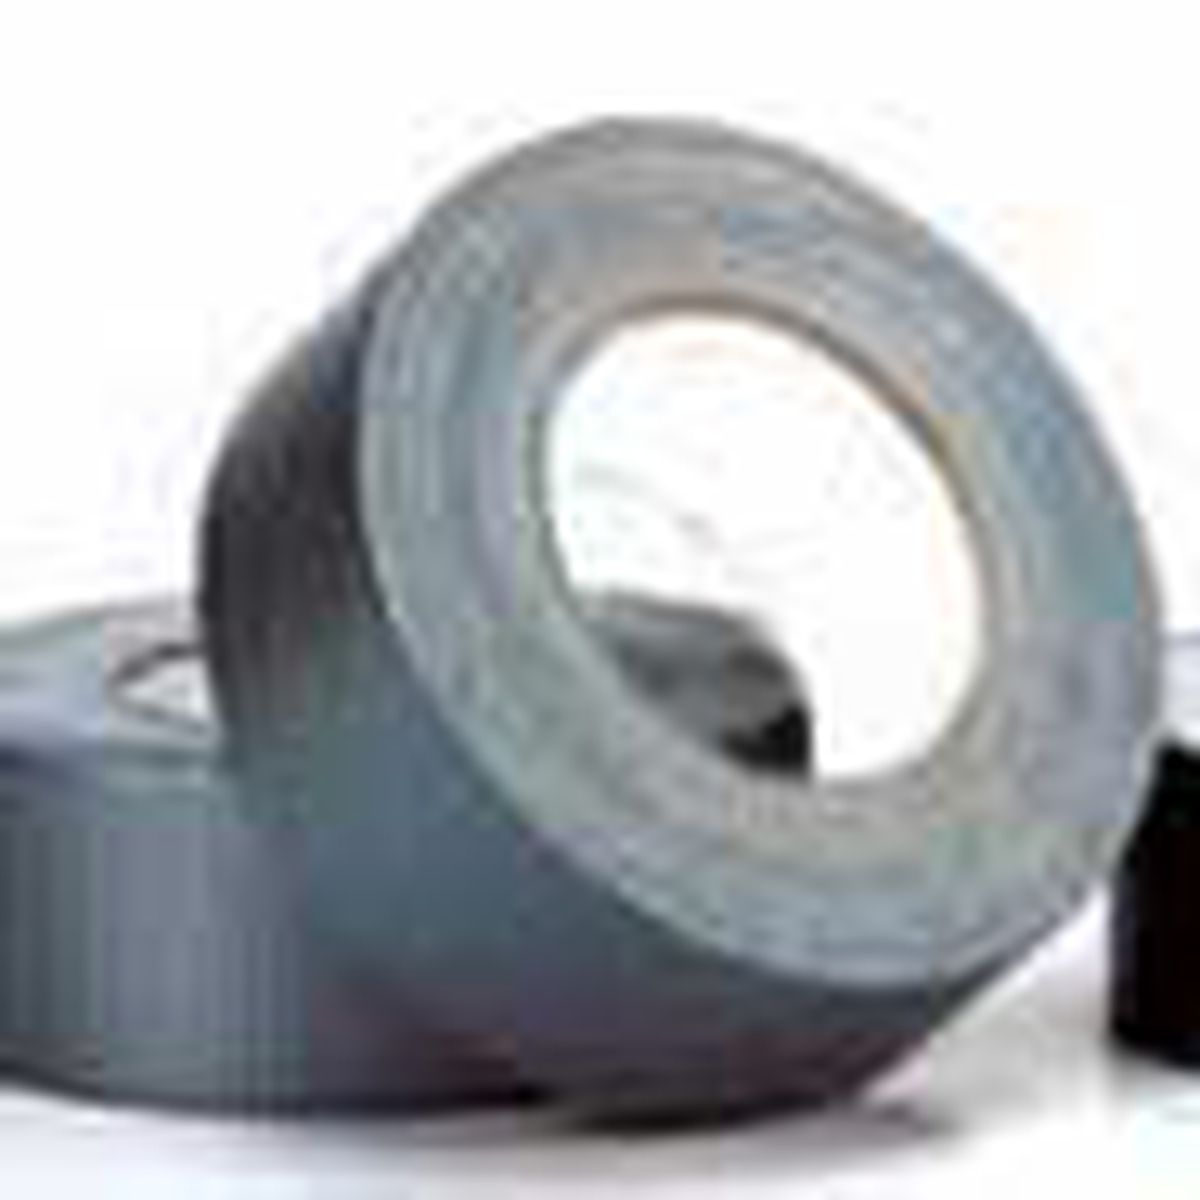 duct tape